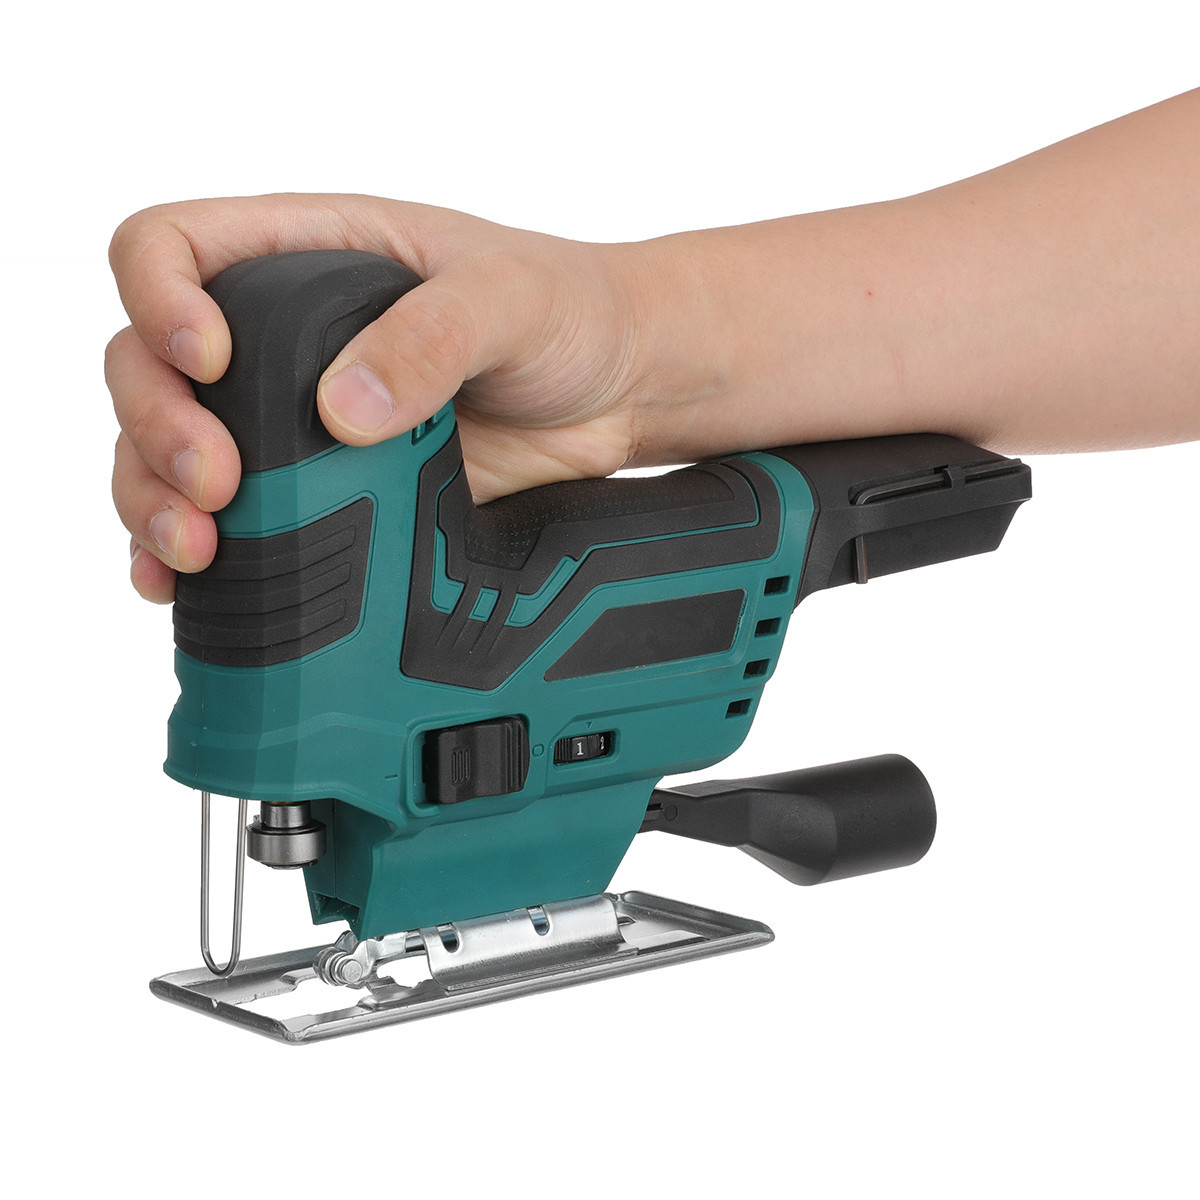 Drillpro-6-Speeds-55mm-2400RPM-Cordless-Jigsaw-Electric-Jig-Saw-Multi-function-Woodworking-Power-Too-1937968-10